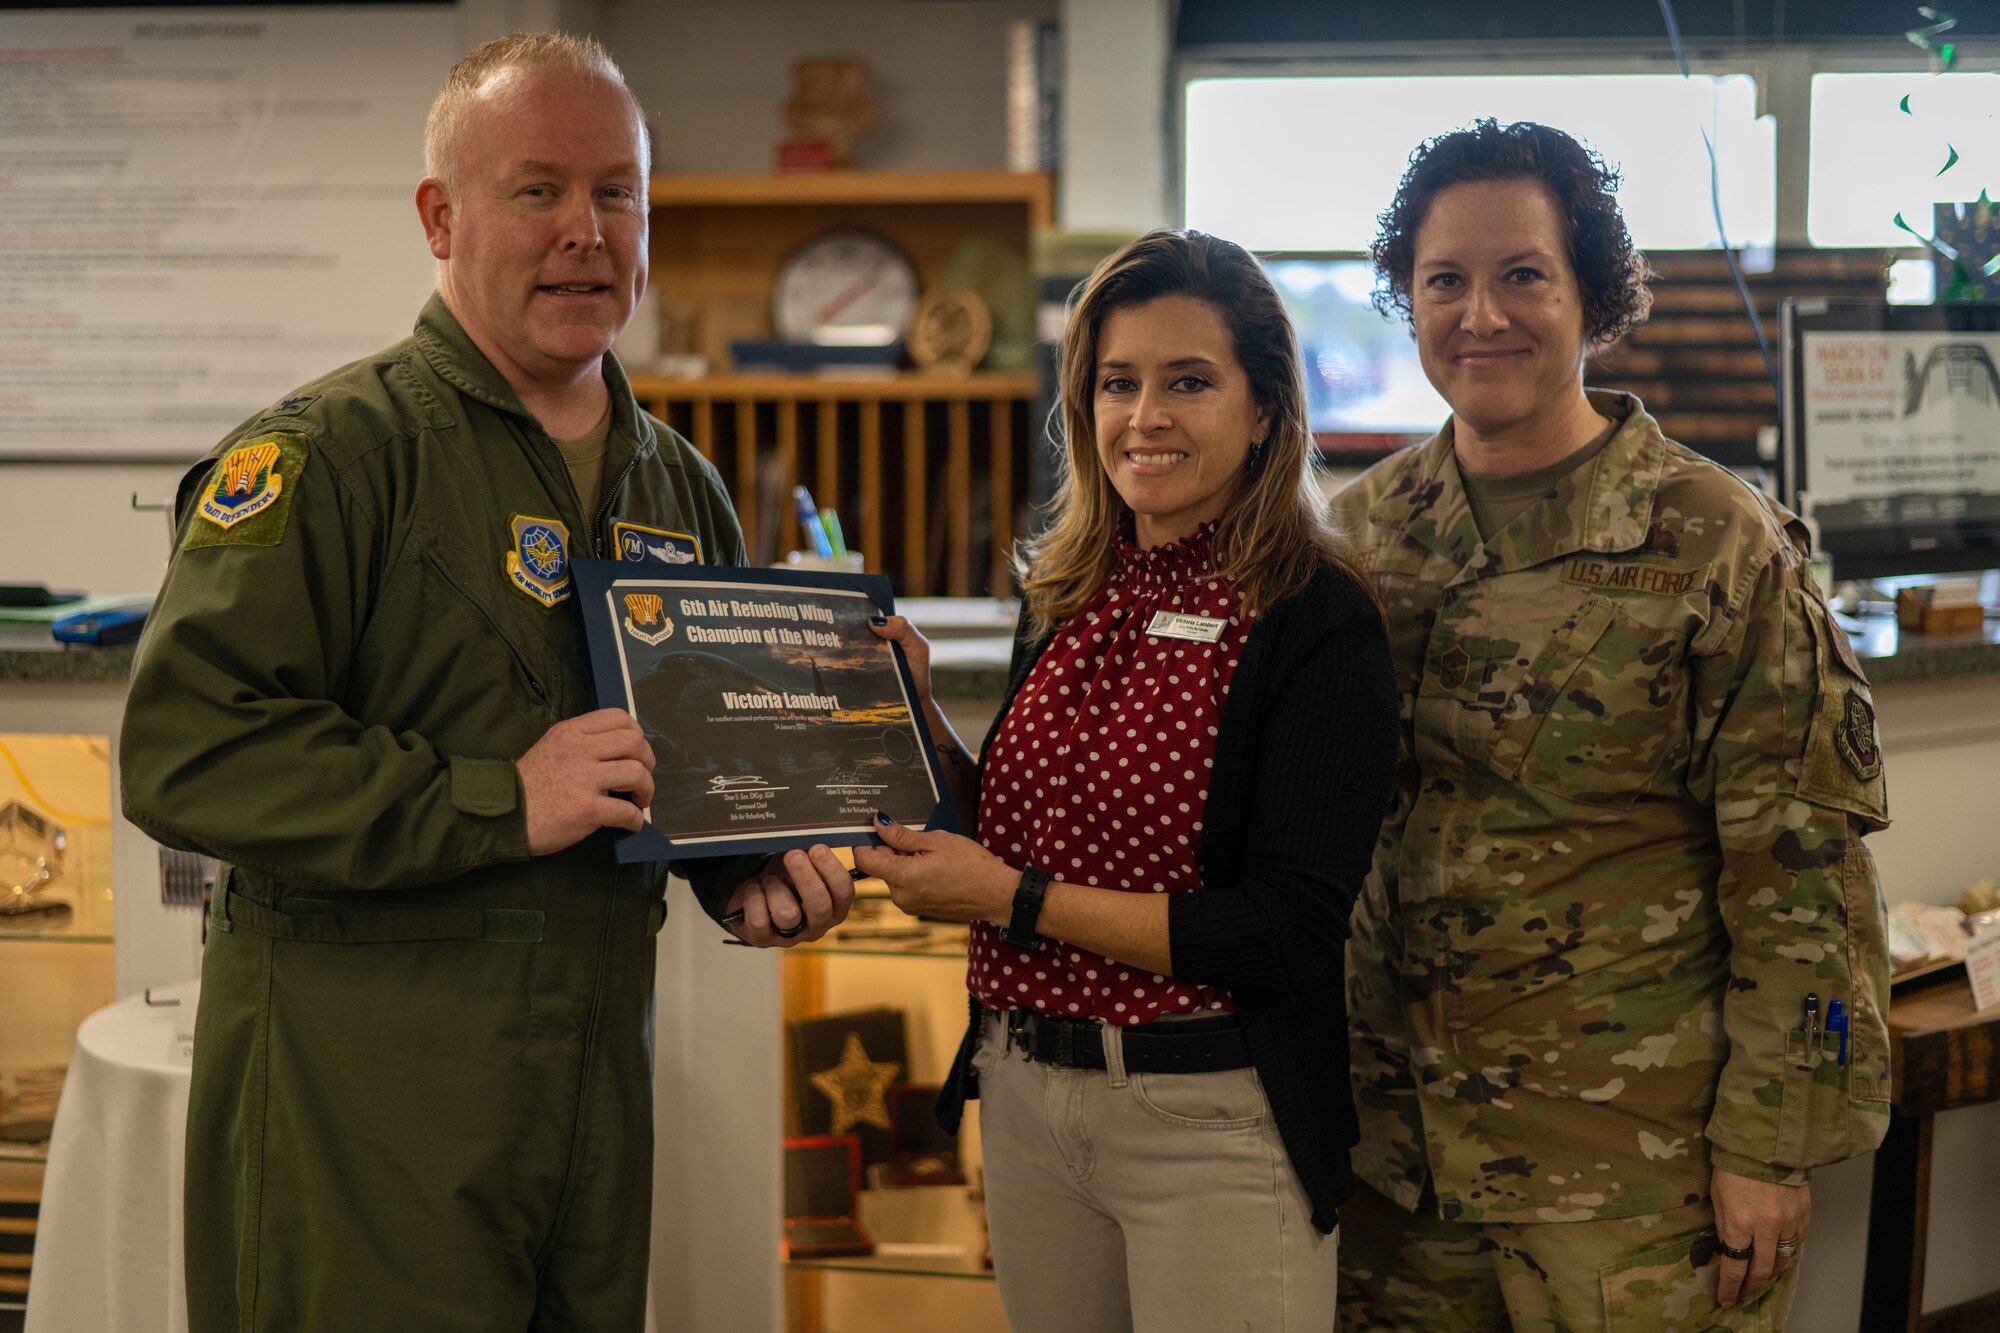 Lambert and her coworkers carried out a short-notice order during the holidays for a U.S. Special Operations command departing member. The hard work and dedication earned her the Champ of the Week recognition alongside two of her coworkers. (U.S. Air Force photo by Airman 1st Class Zachary Foster)